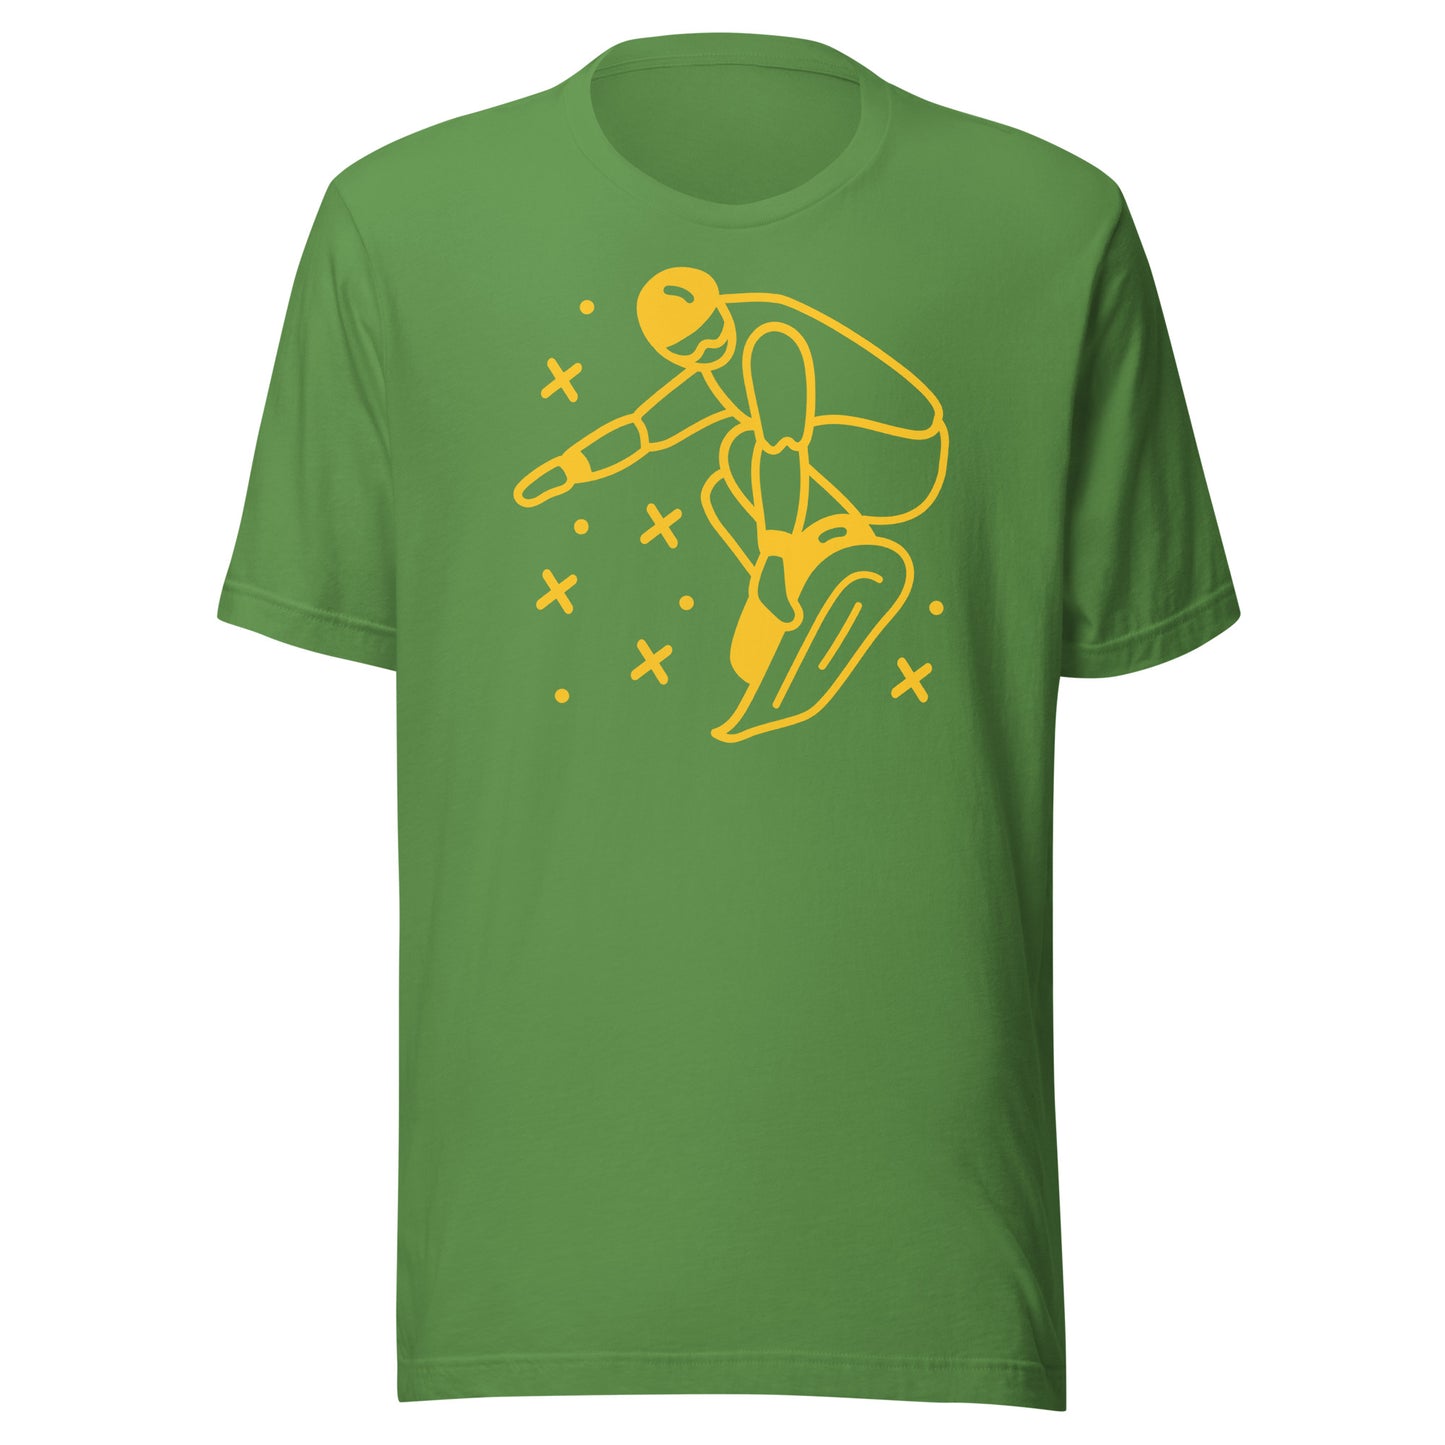 Trendy Skate T-Shirts for Skateboard Enthusiasts